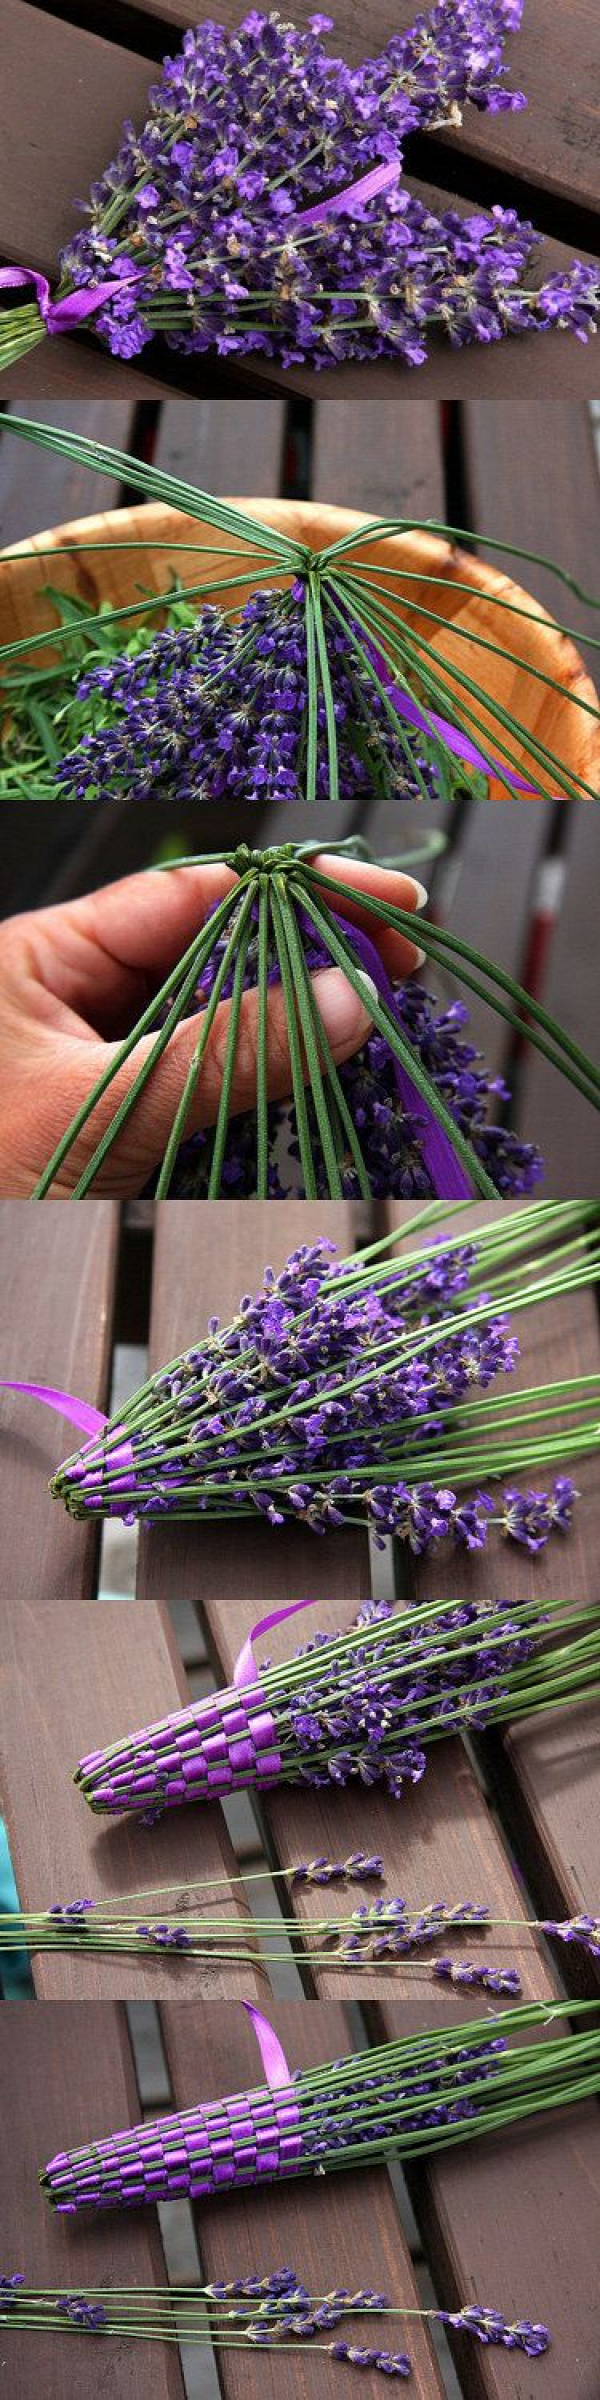 Organic Lavender Wand - Light Green and Purple Satin Ribbon - Made in Canada. $19.00, via Etsy. - ça est une chouette idée